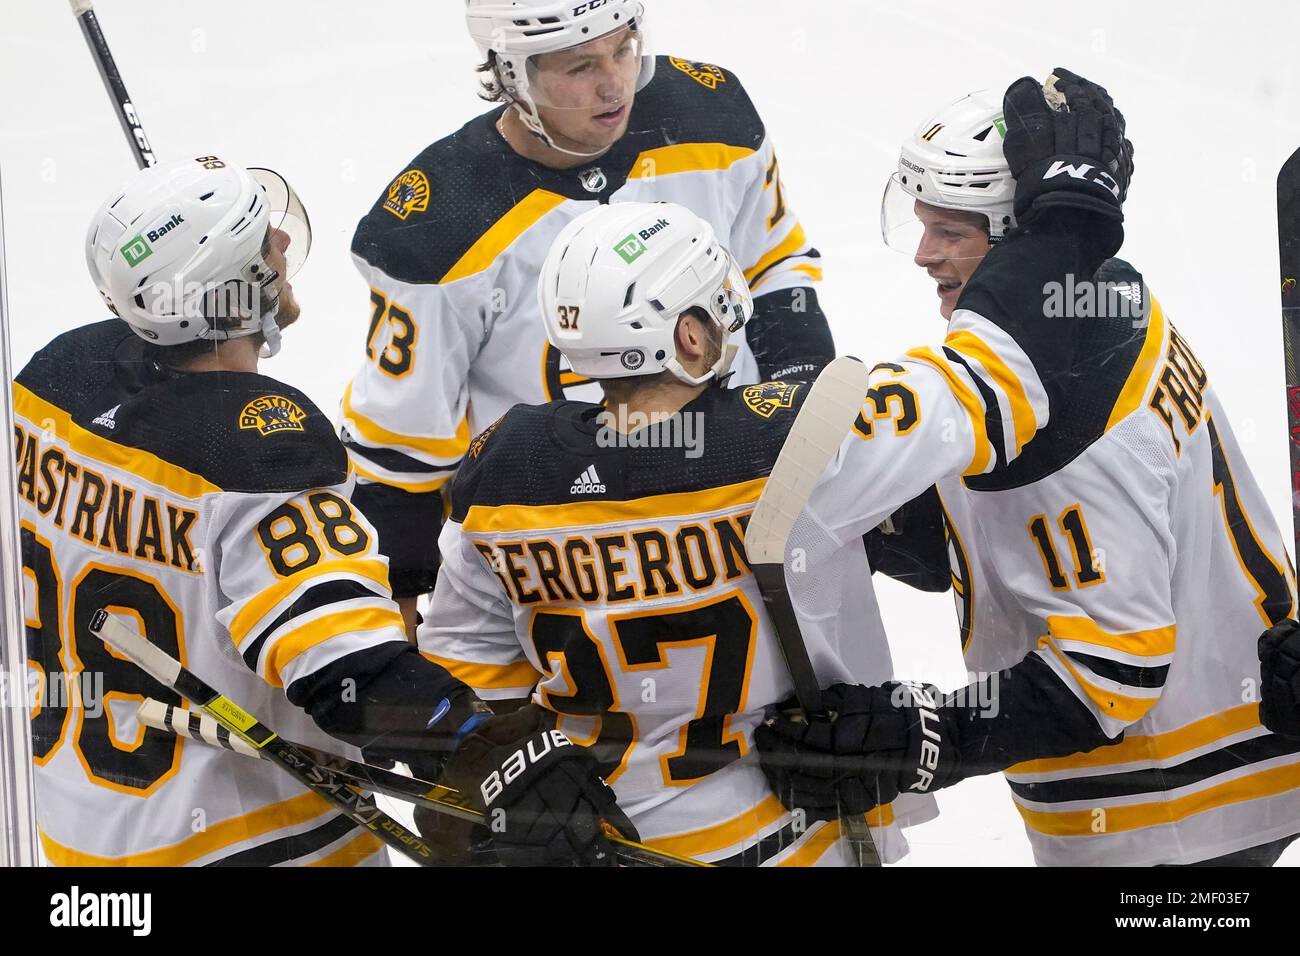 Trent Frederic of the Boston Bruins celebrates after scoring